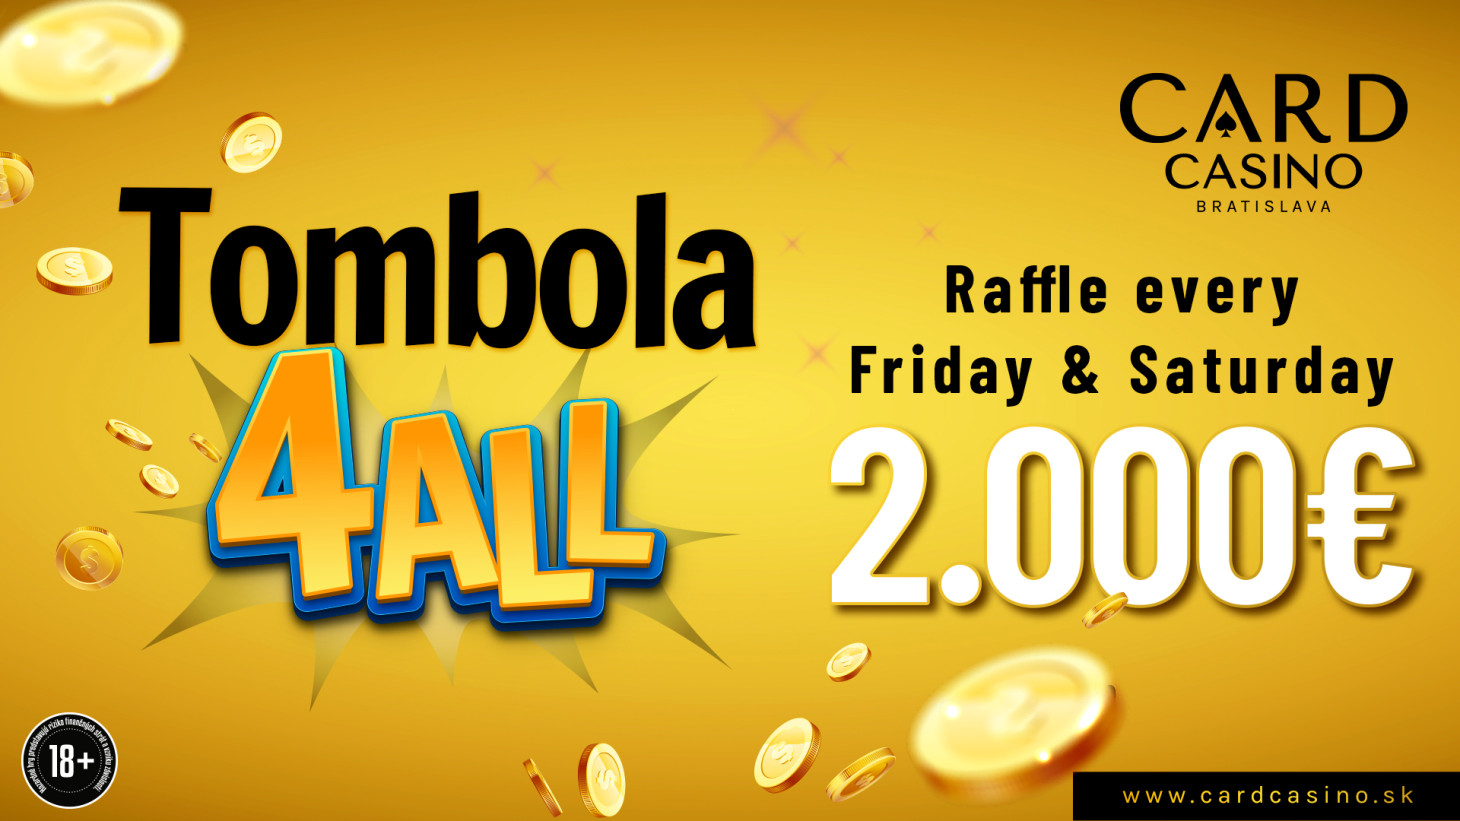 The raffle draw continues! 4.000€ are up for grabs weekly